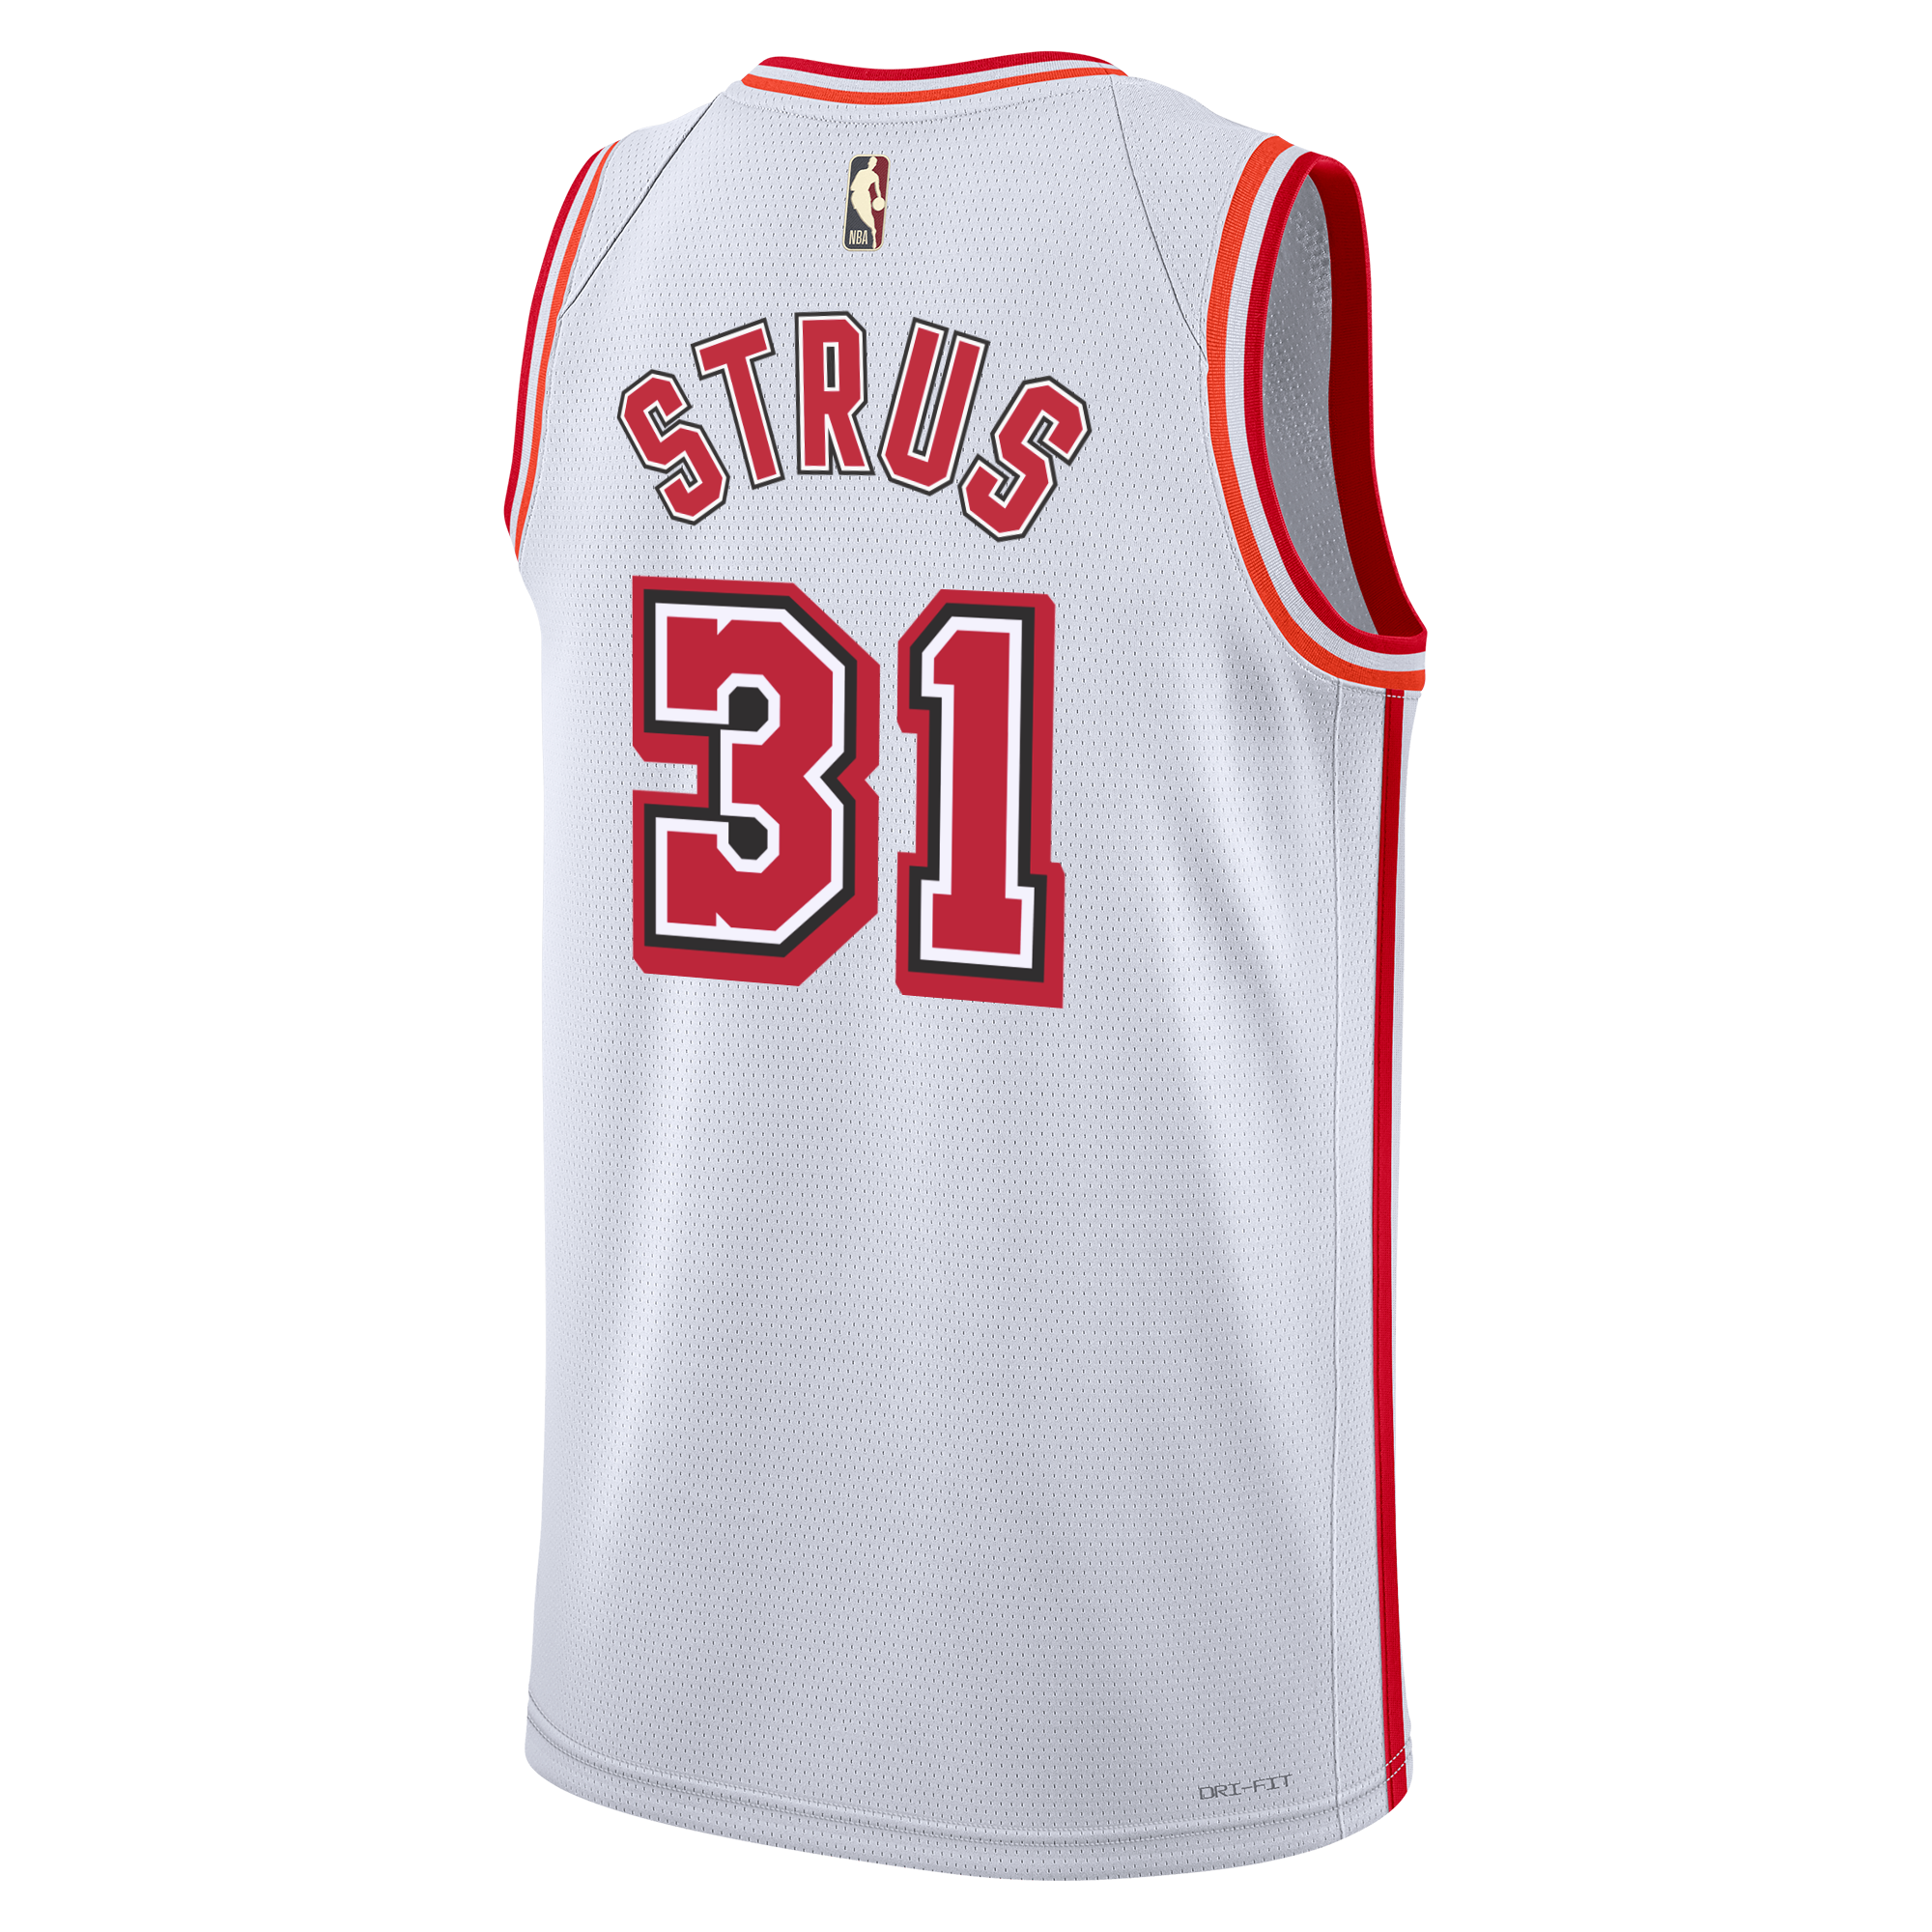 Max Strus Men's Basketball Jersey, Heat City Edition # 31 Jersey Sportswear  Unisex Sleeveless Vest Shirt Sports Top S-2XL Color 8-S : :  Clothing, Shoes & Accessories